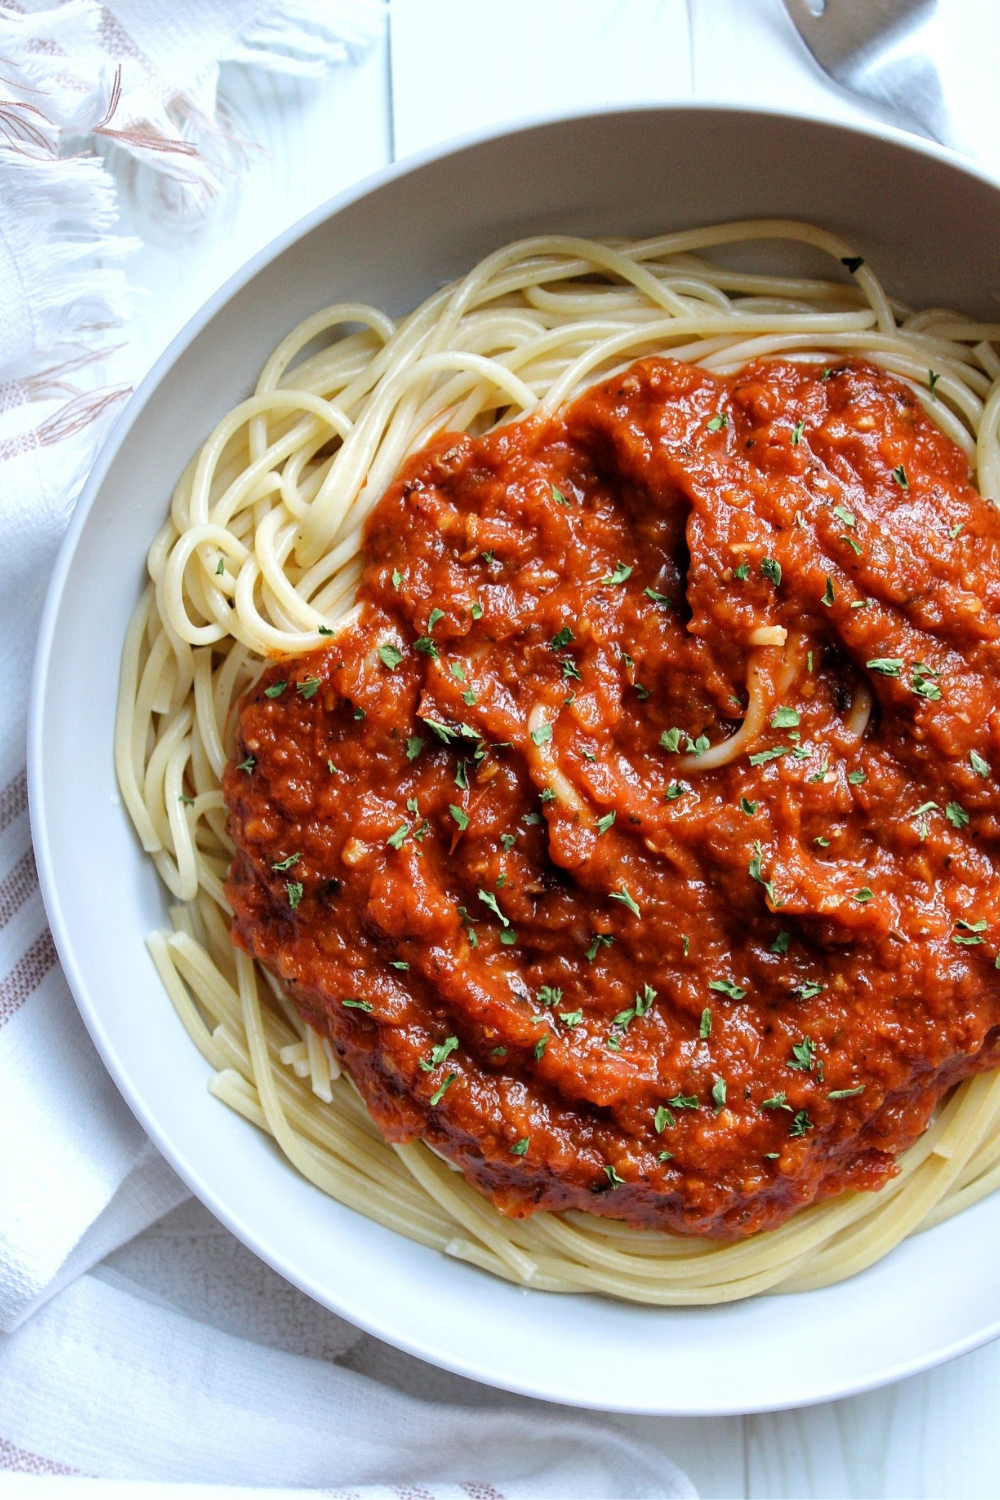 Bowl of spaghetti topped with homemade spaghetti sauce garnished with parsley.